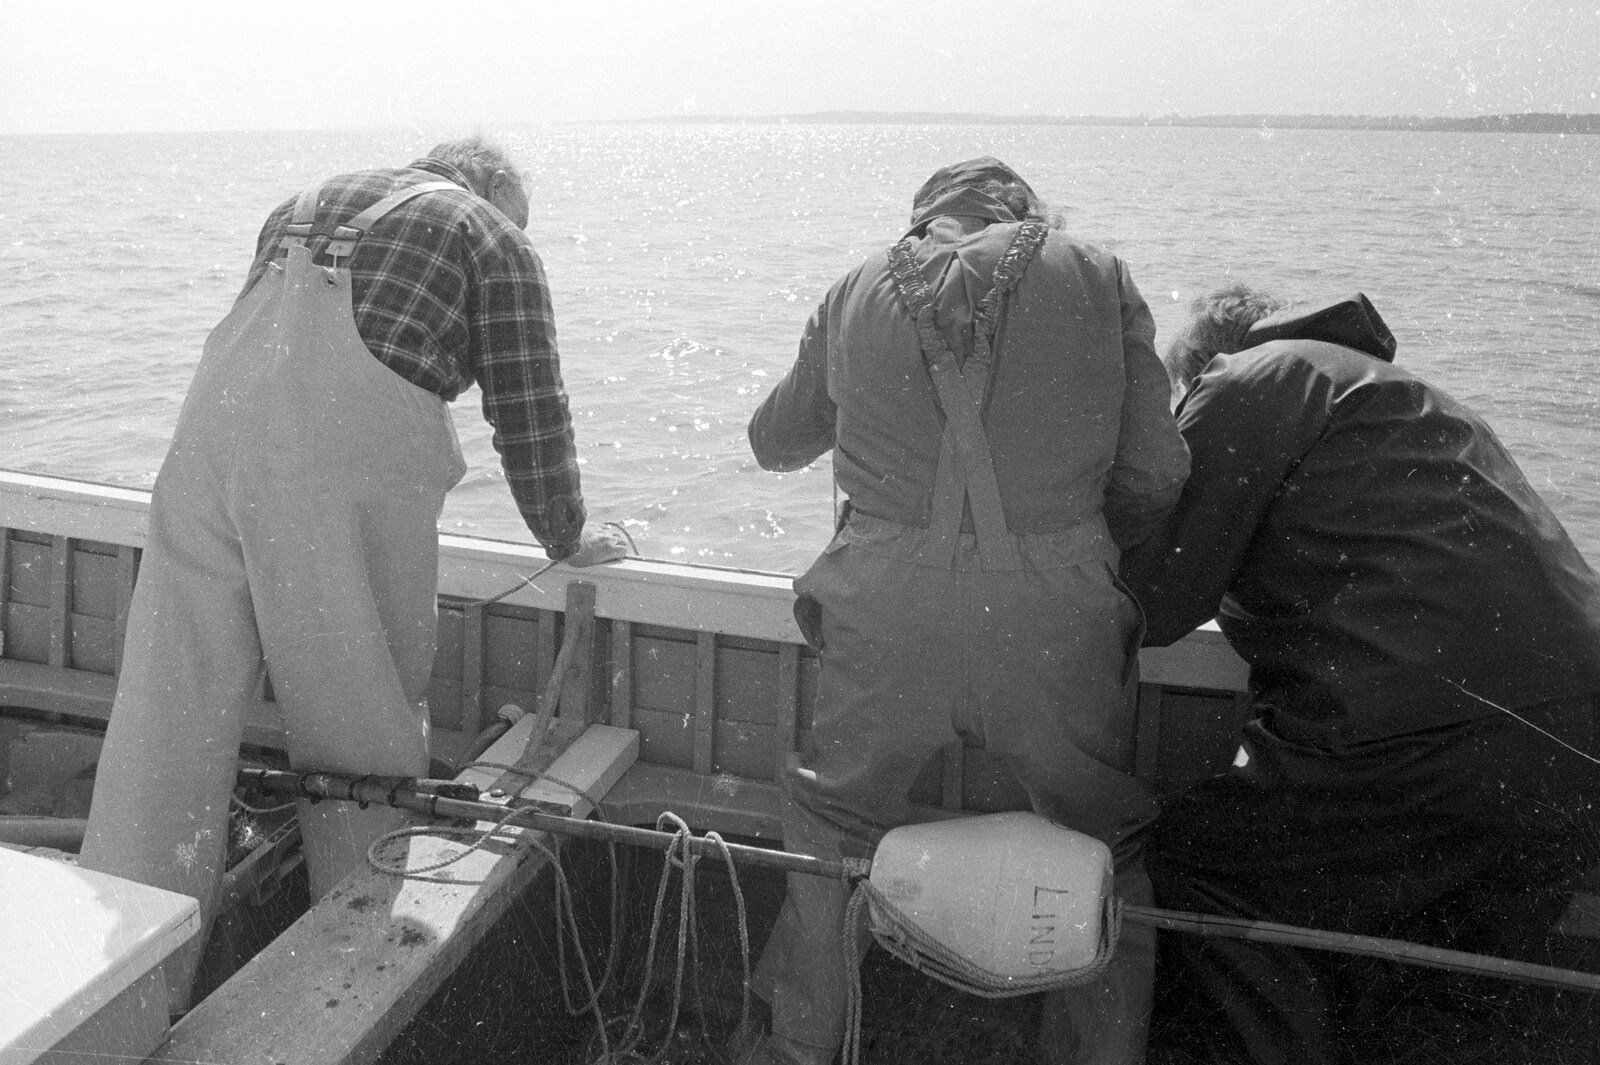 The fishermen look at the nets from A Fishing Trip on the Linda M, Southwold, Suffolk - 25th April 1993